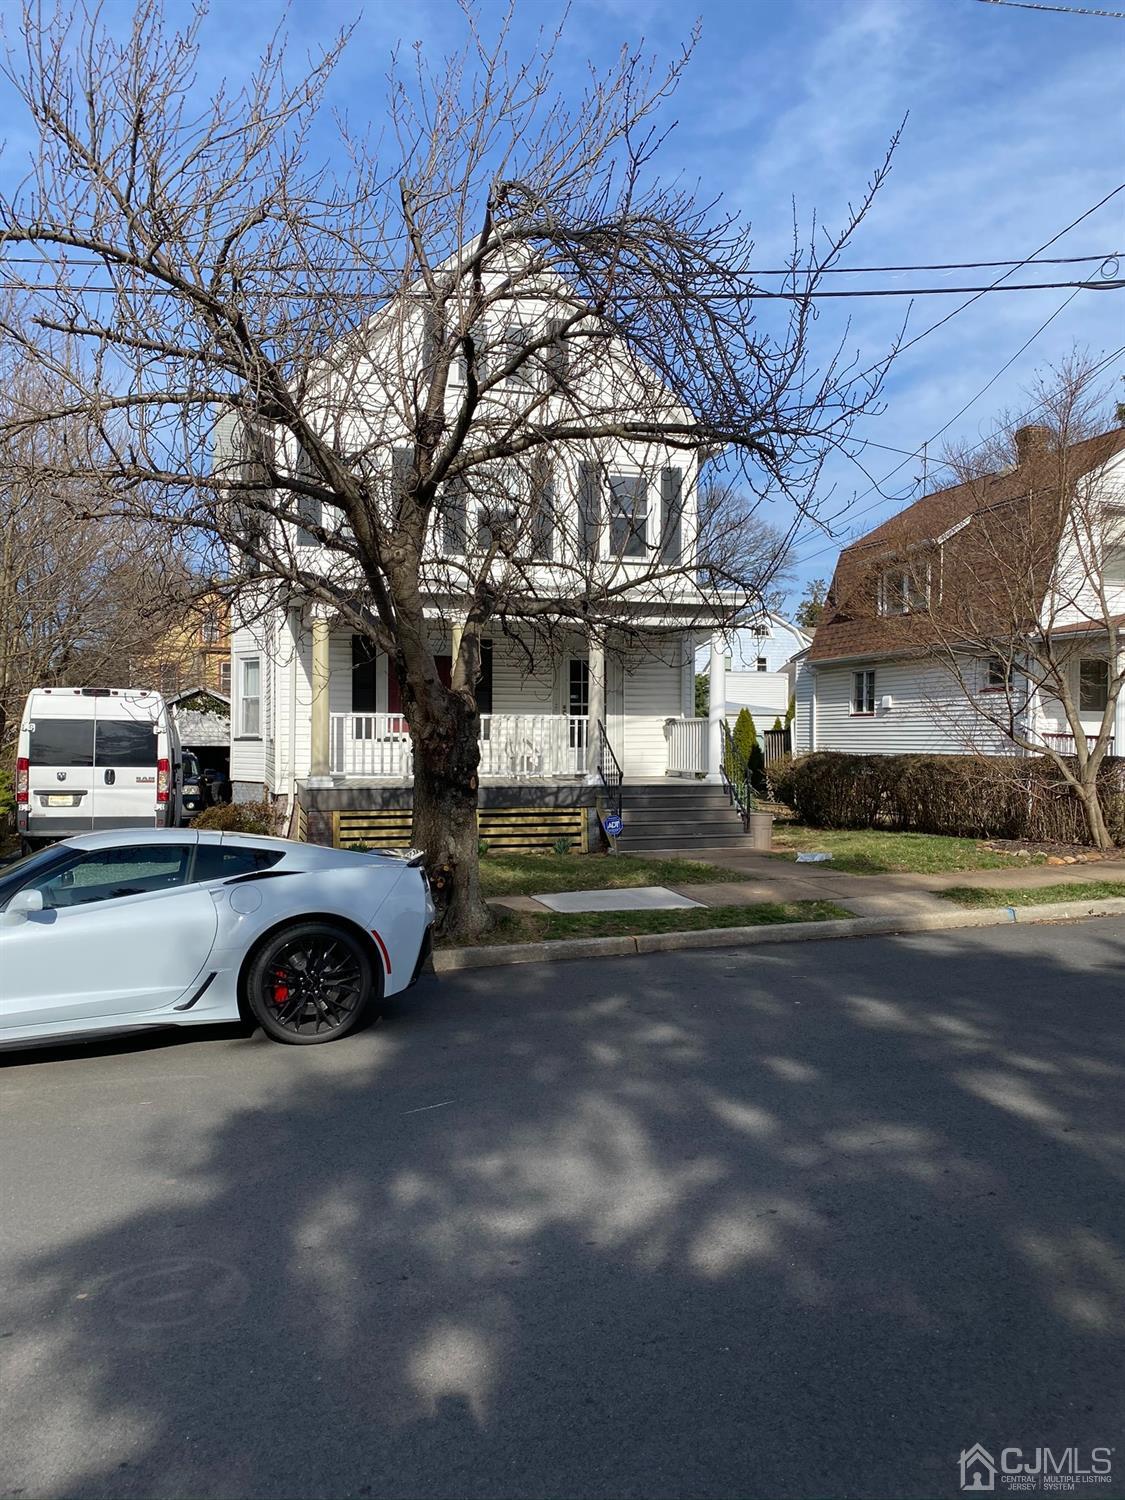 a view of a car in front of a house